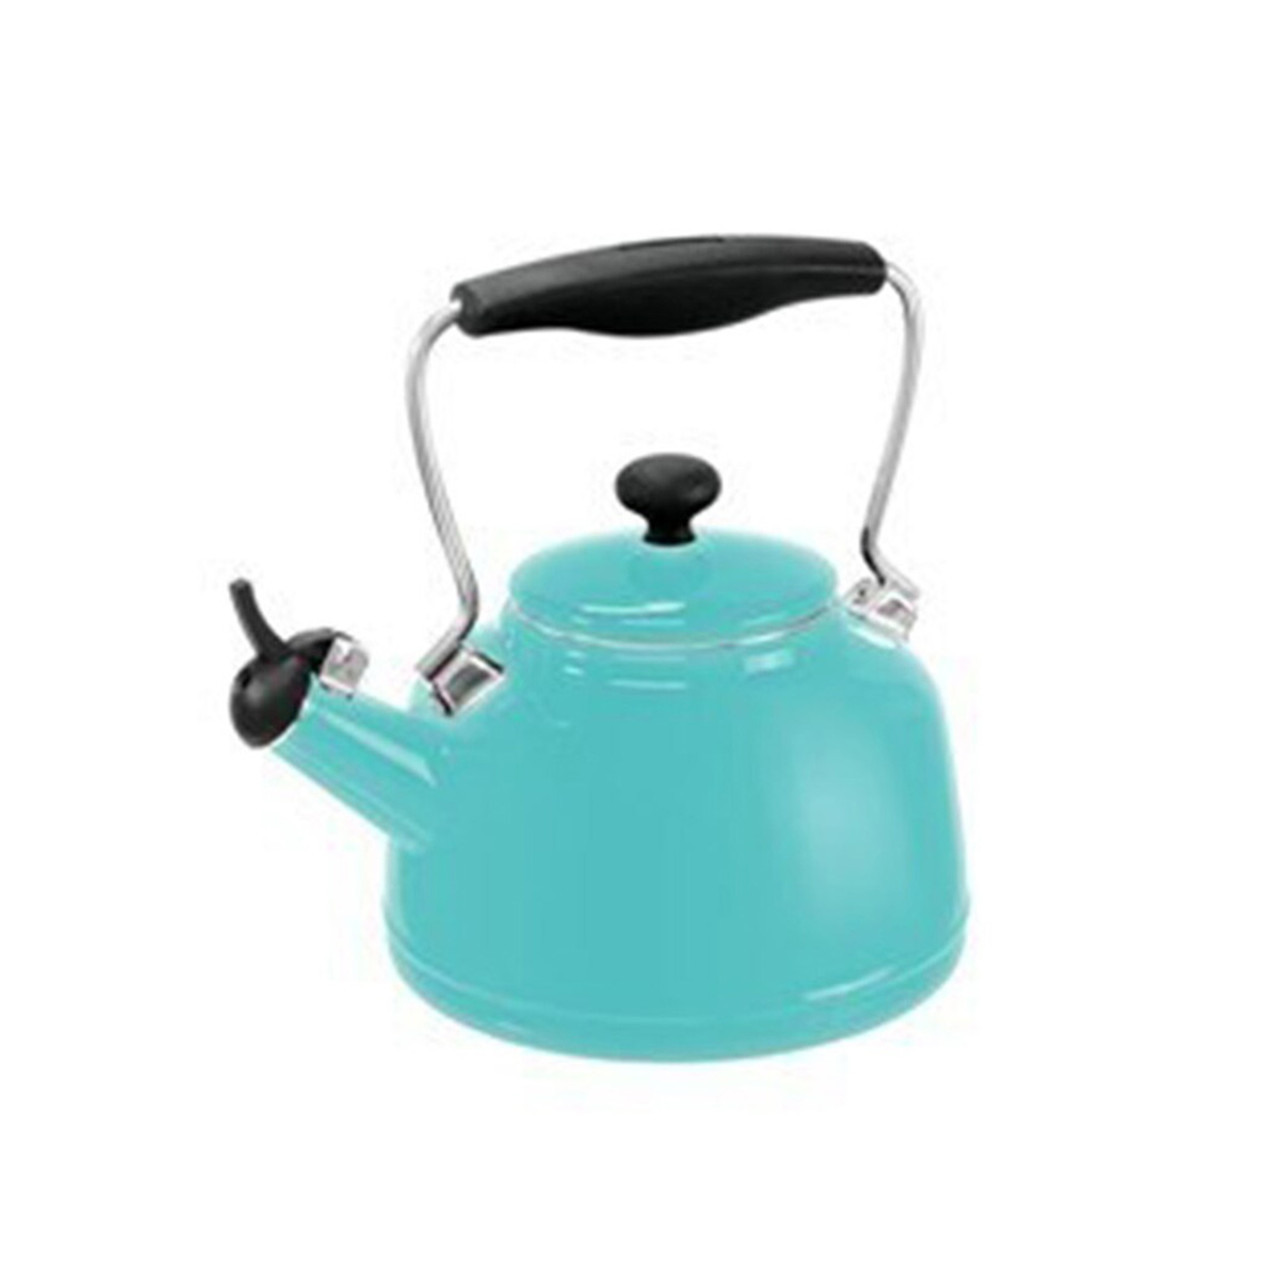 Chantal Classic Stainless Steel Whistling Tea Tea Kettle + Reviews